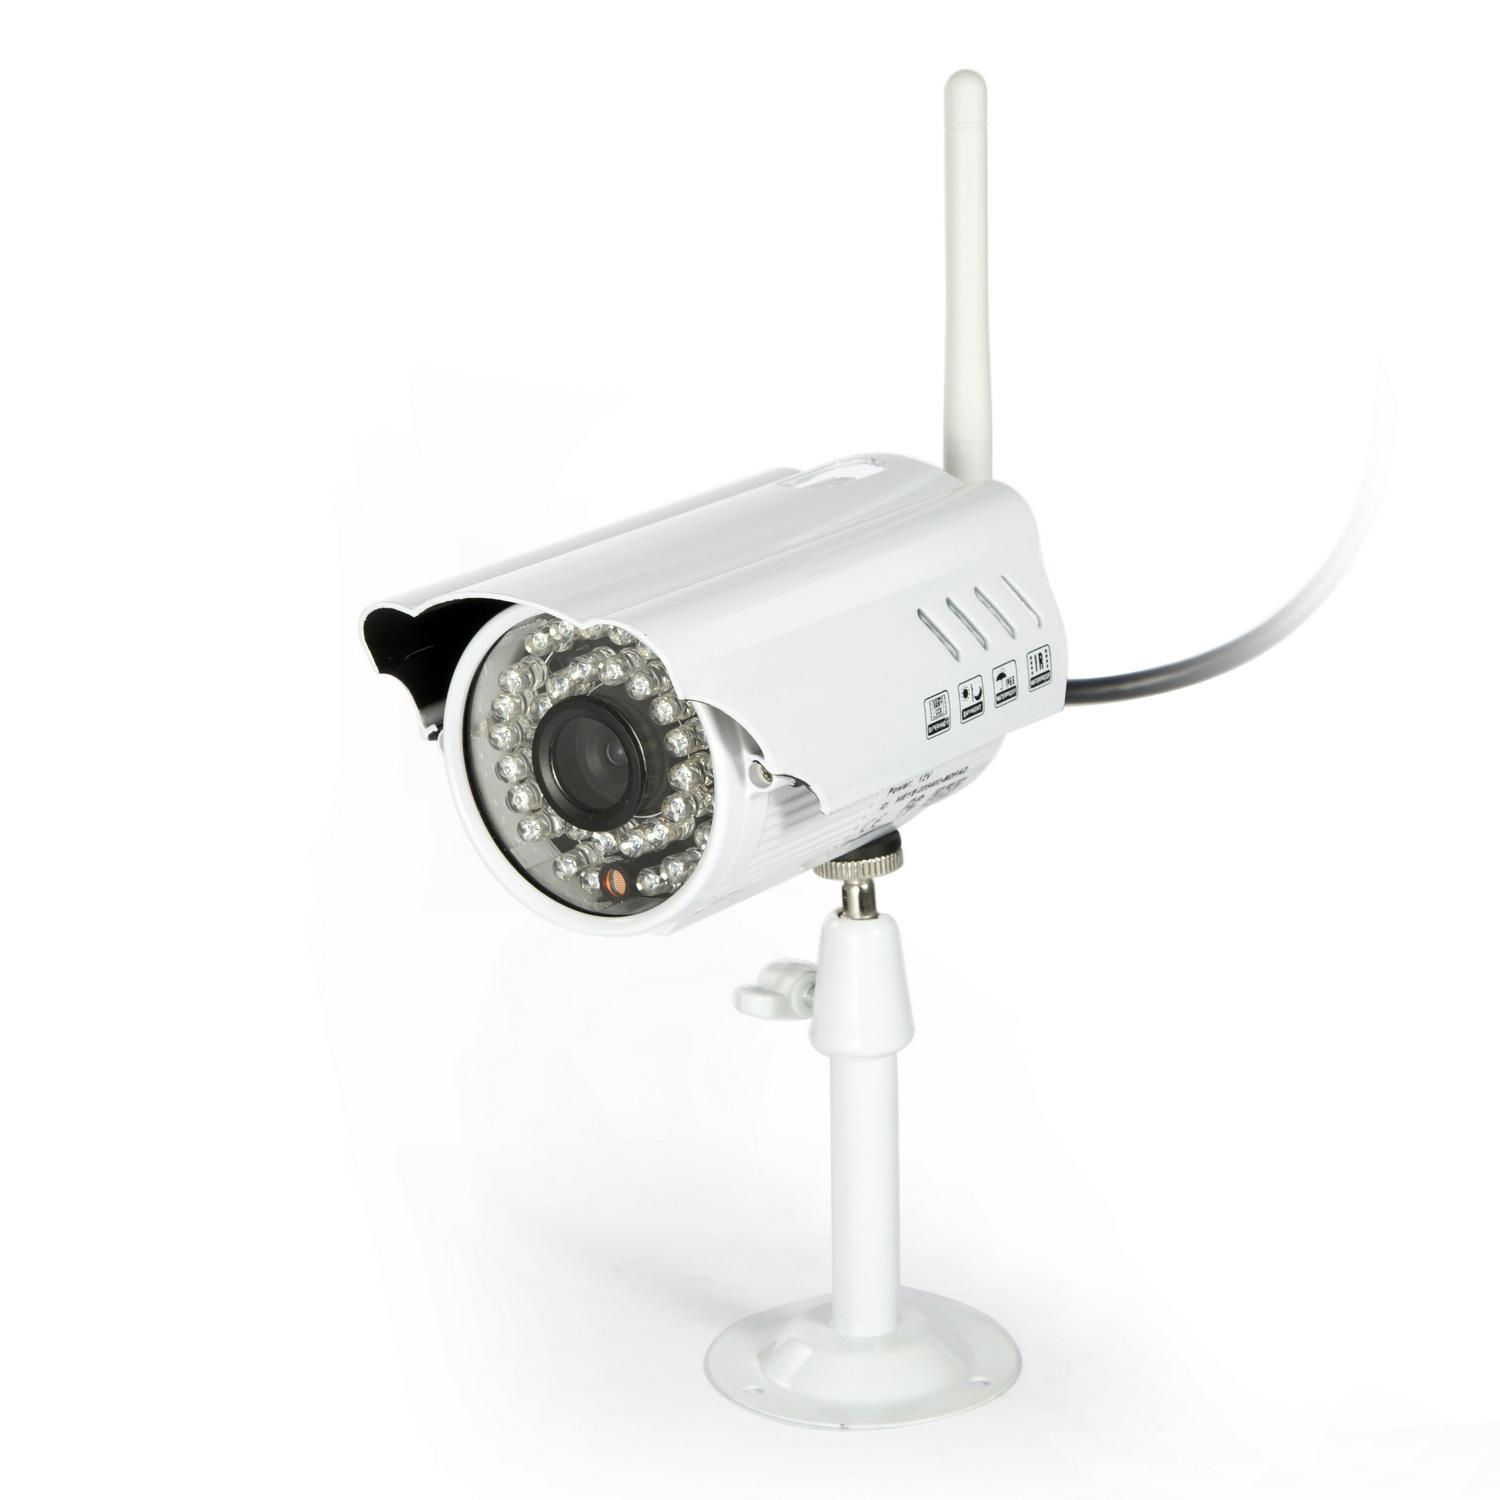 Alytimes Aly009 ir cut sd card outdoor hd security camera ip